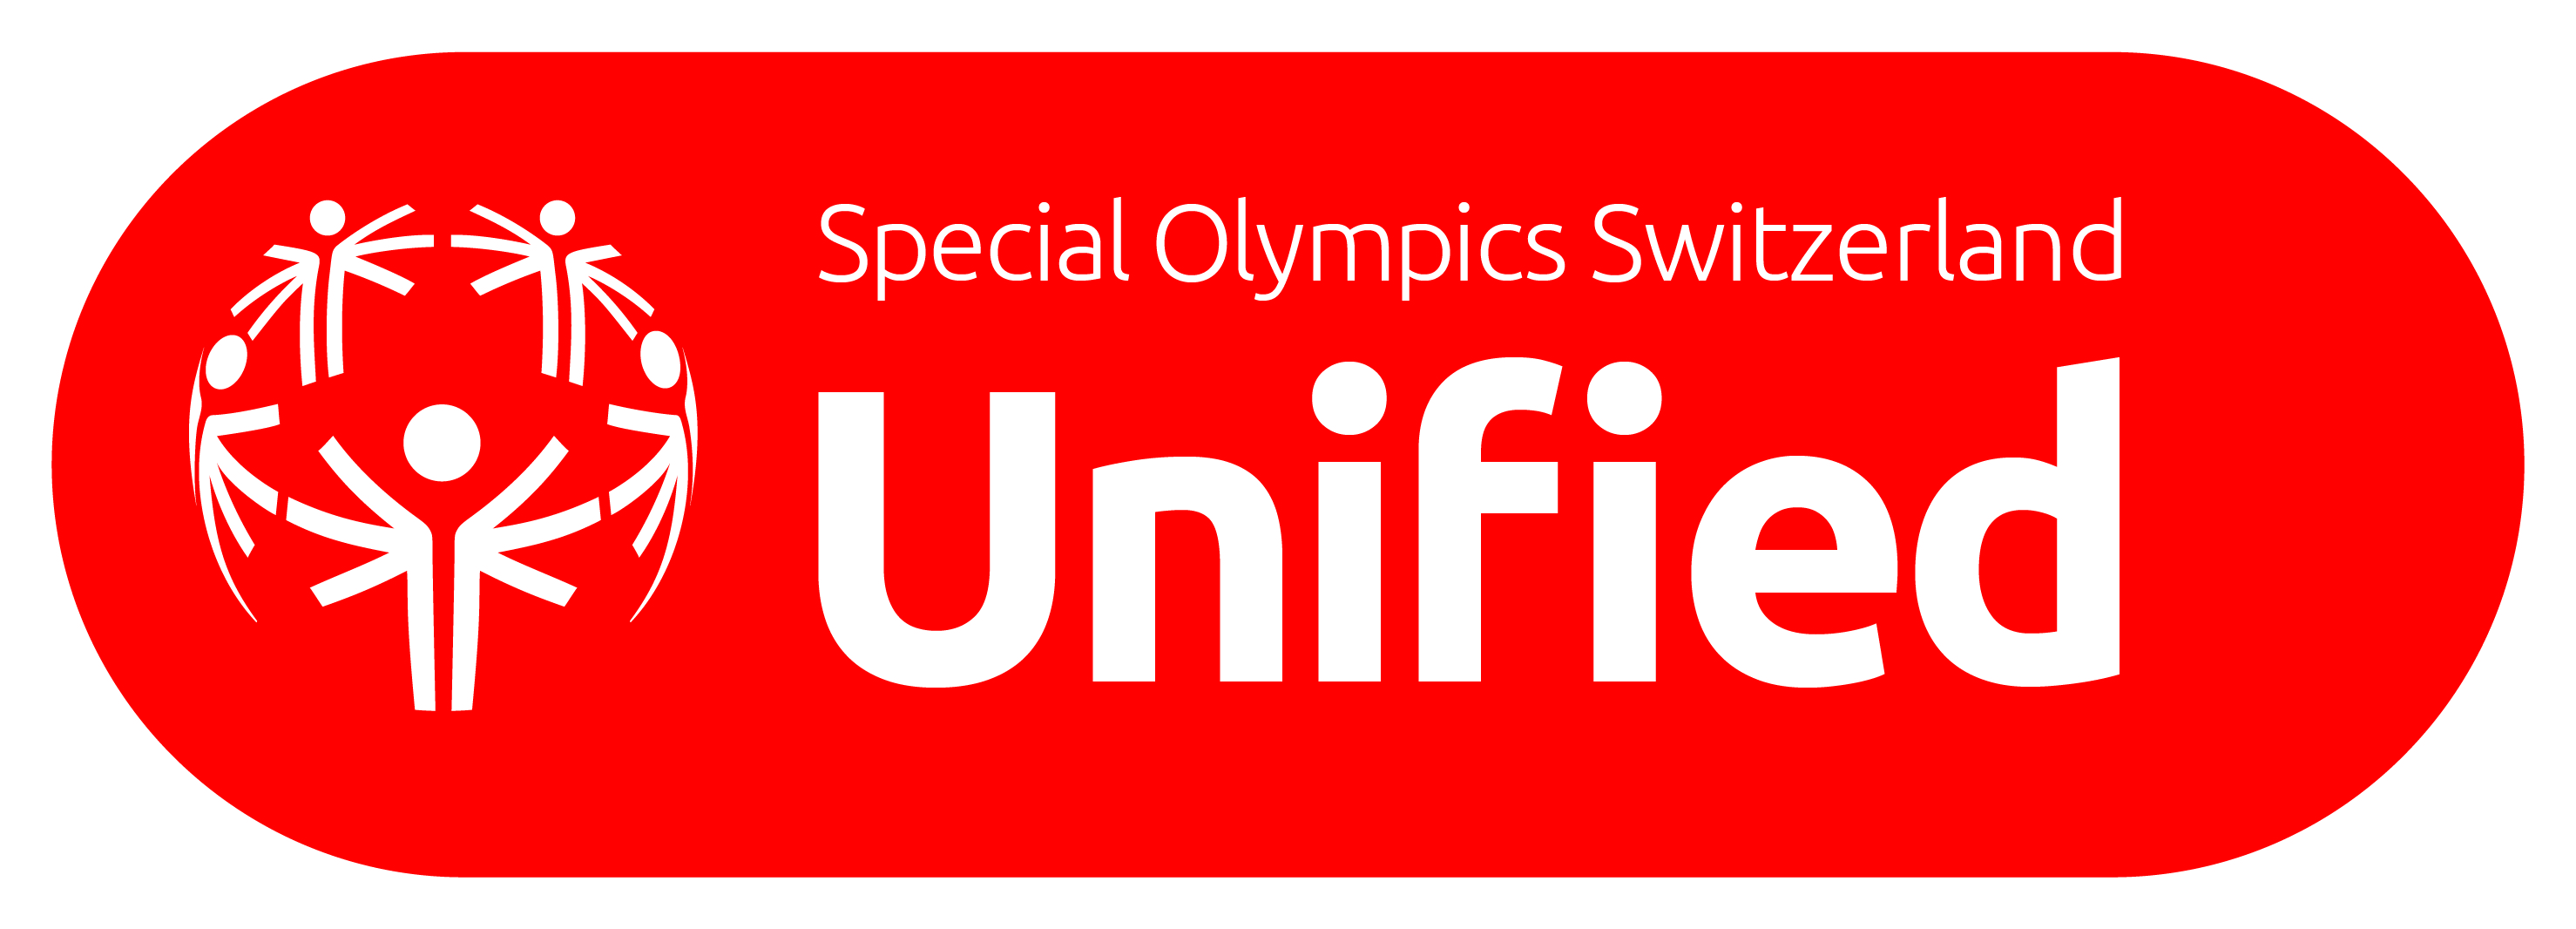 Special Olympics Switzerland Unified Label